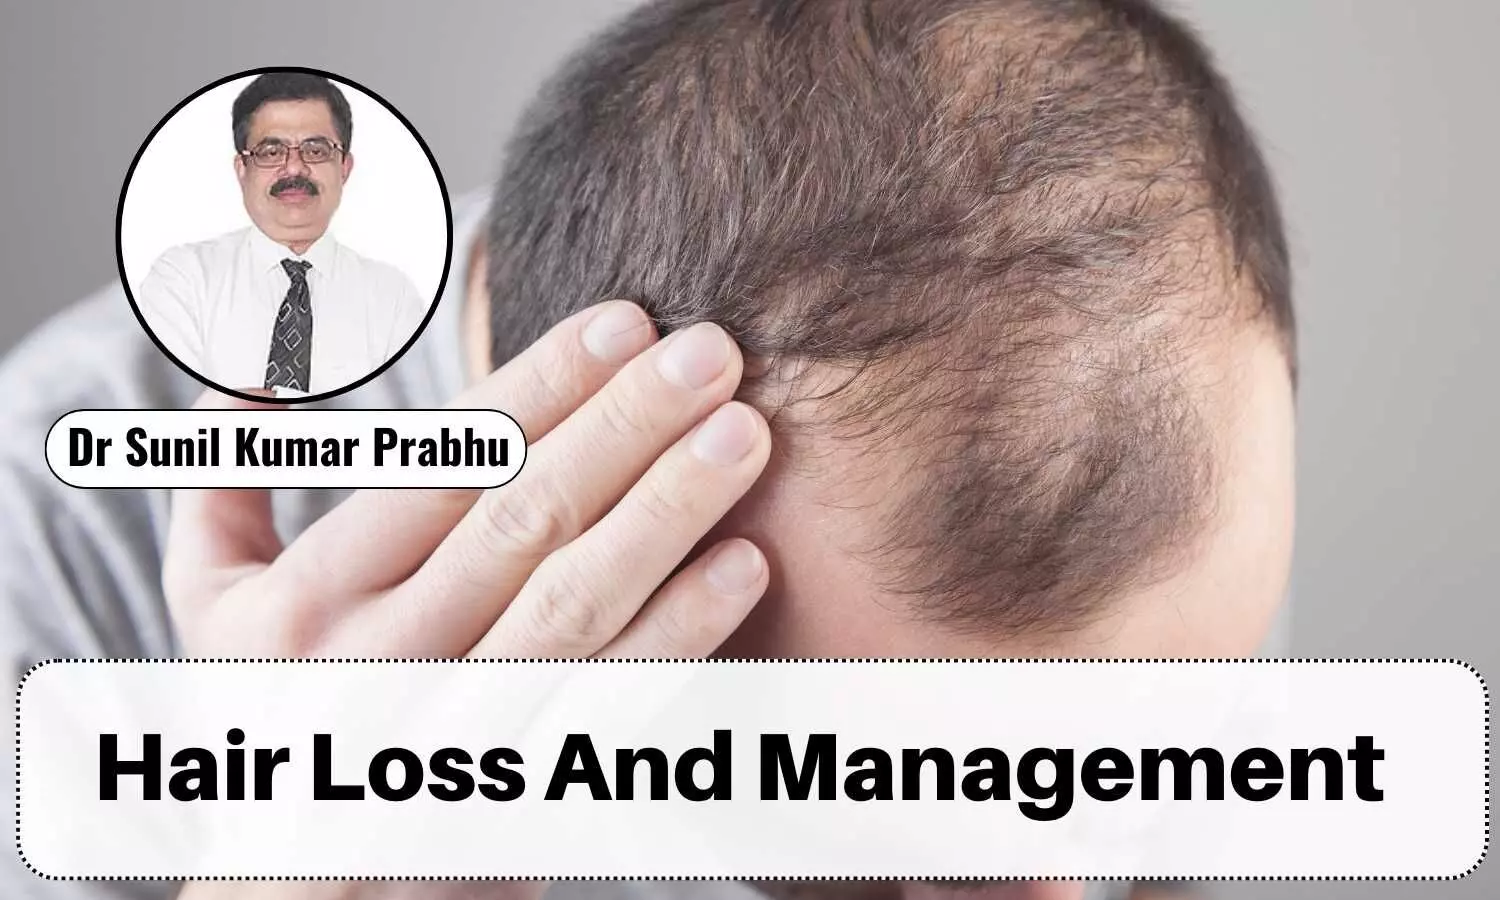 Female Pattern Hair Loss: Symptoms, Stages And Treatment | Onlymyhealth